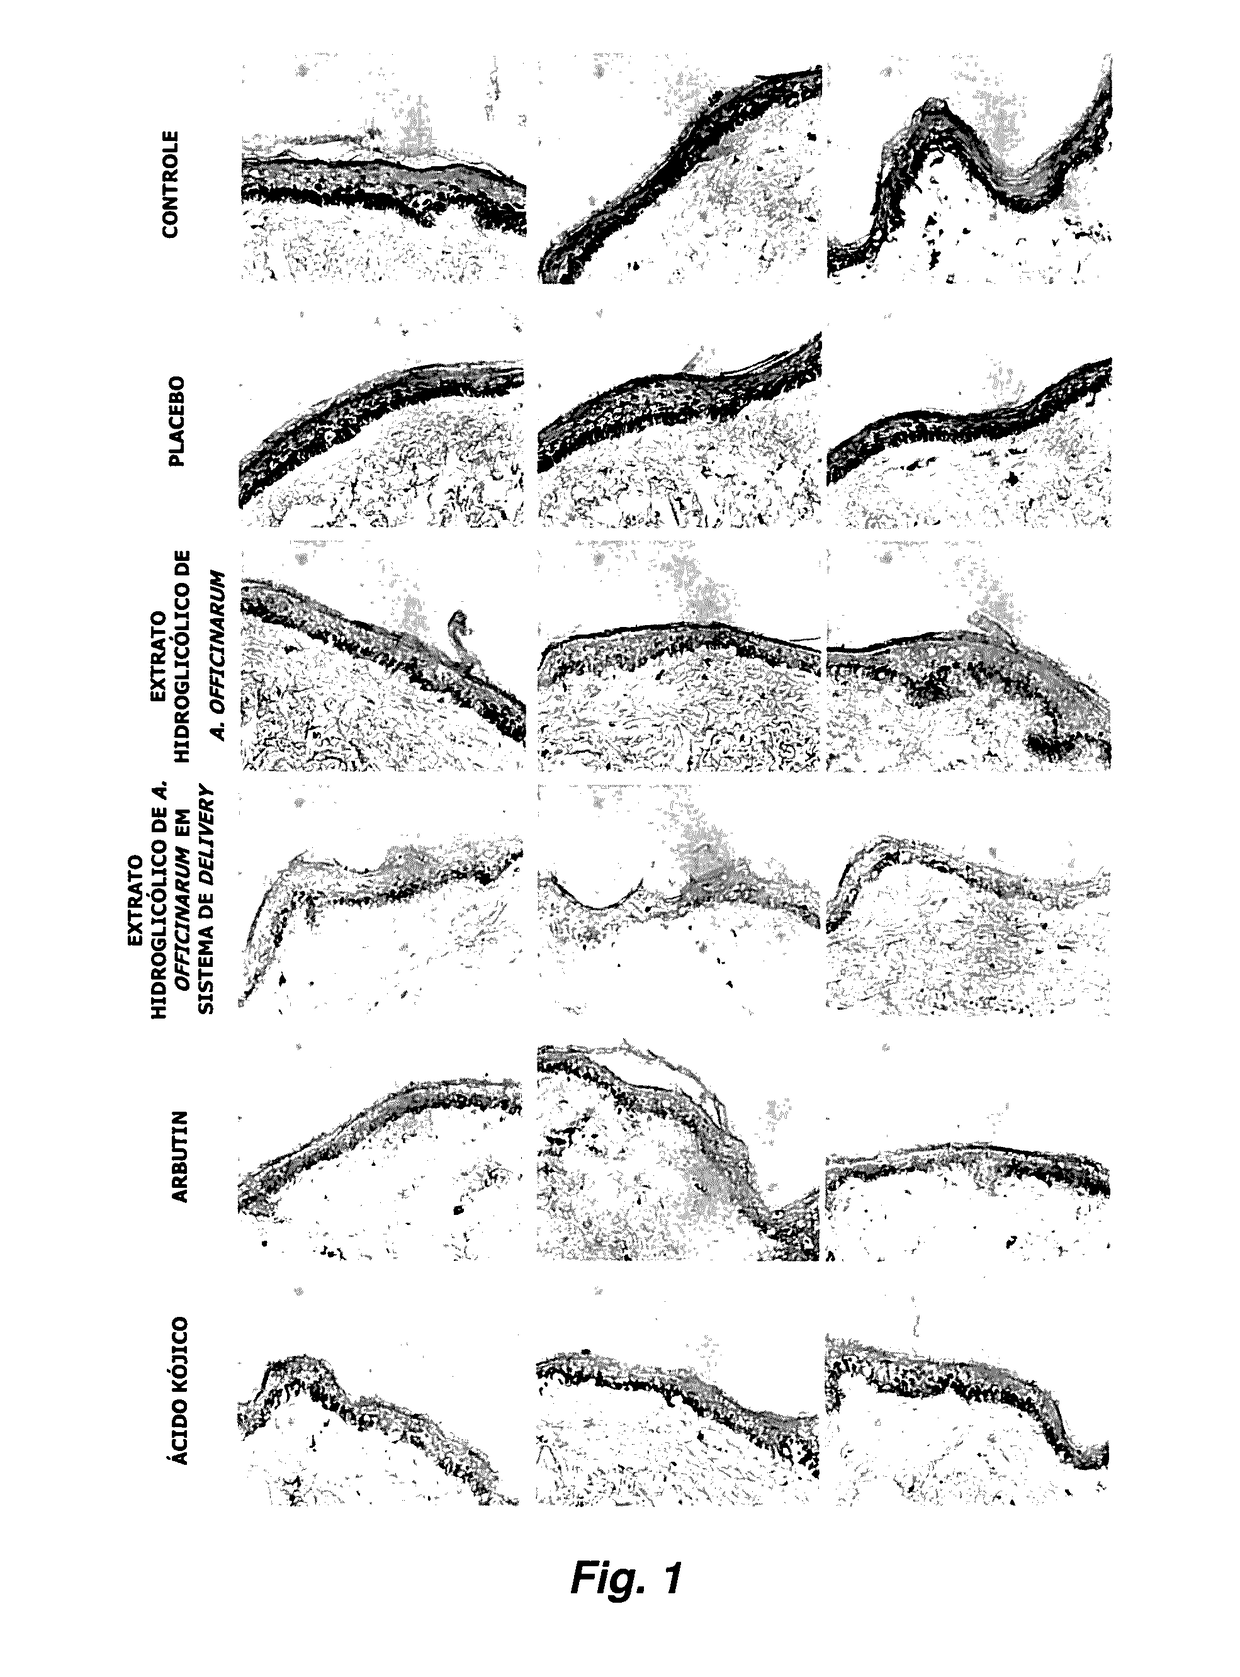 Lightening active agent containing plant extracts, uses thereof and compositions containing the same